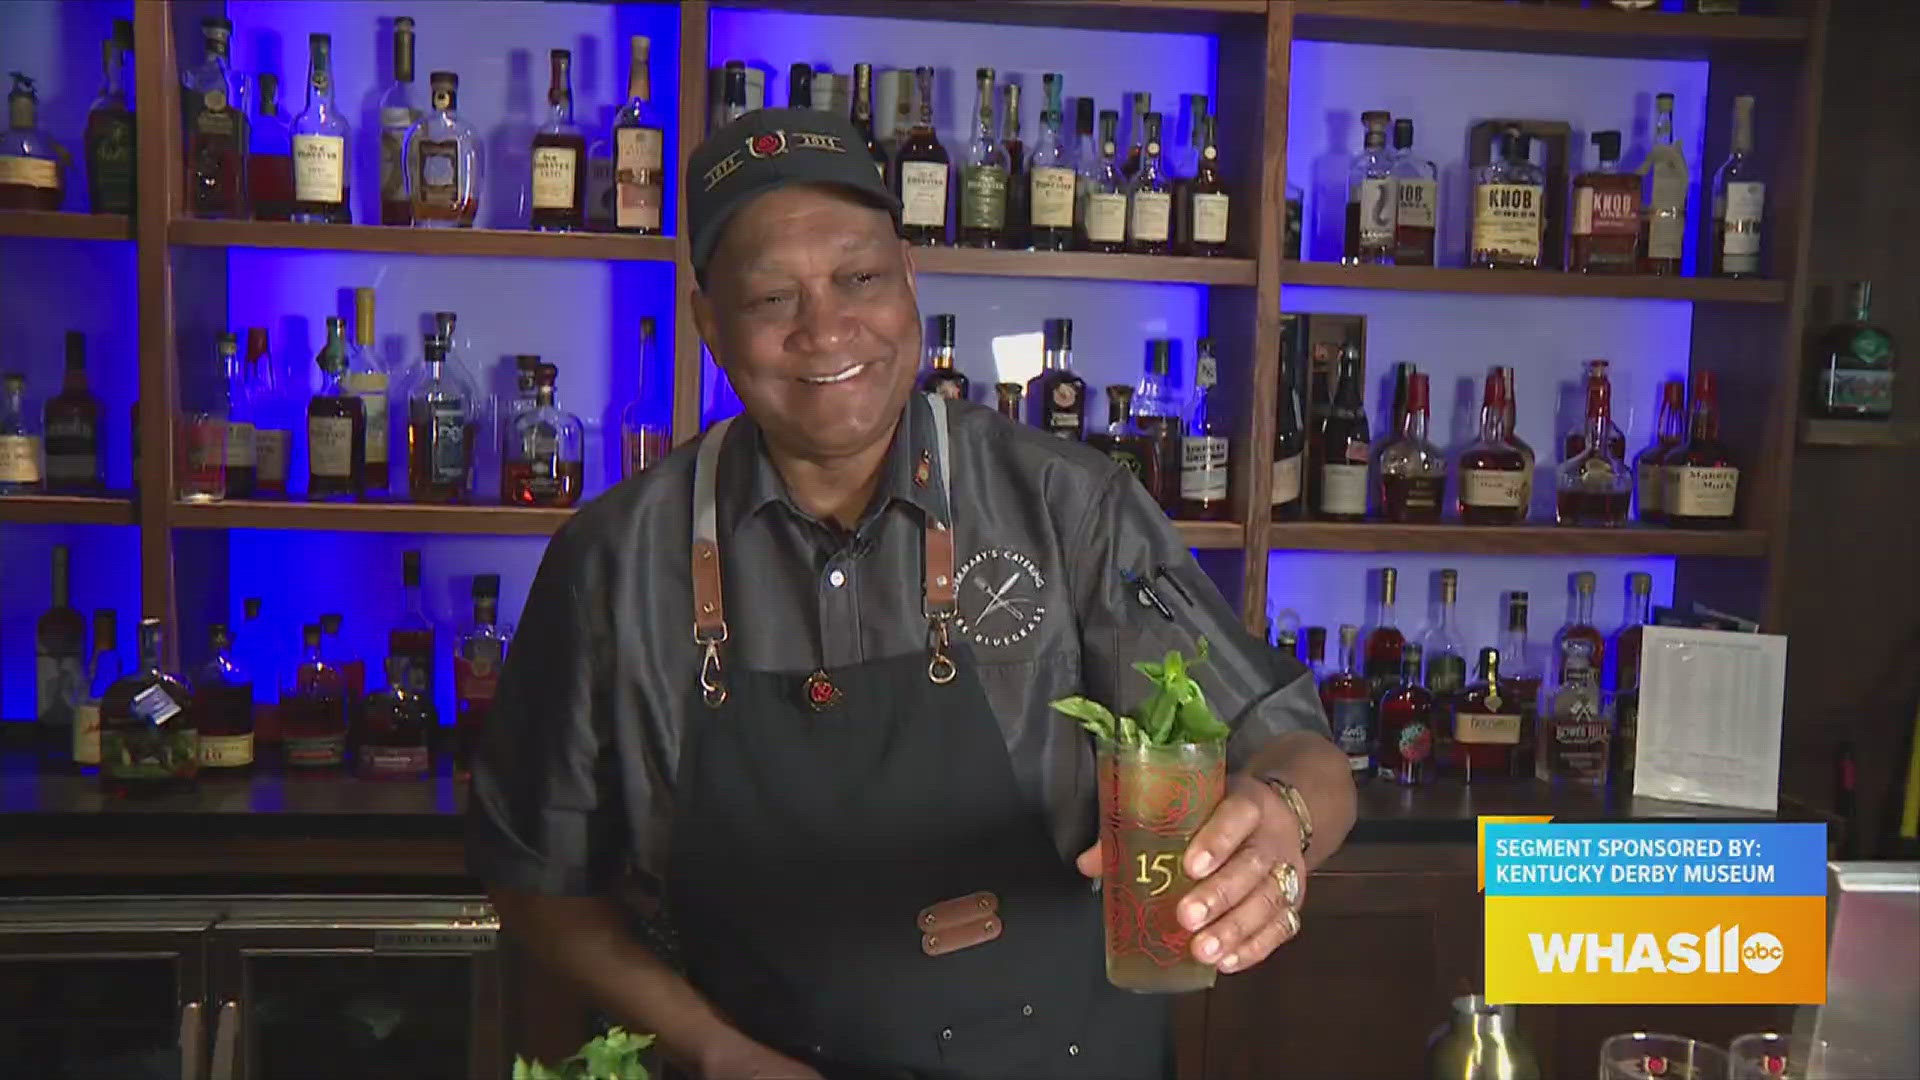 The Kentucky Derby Museum shows us how to make a mint julep from scratch.